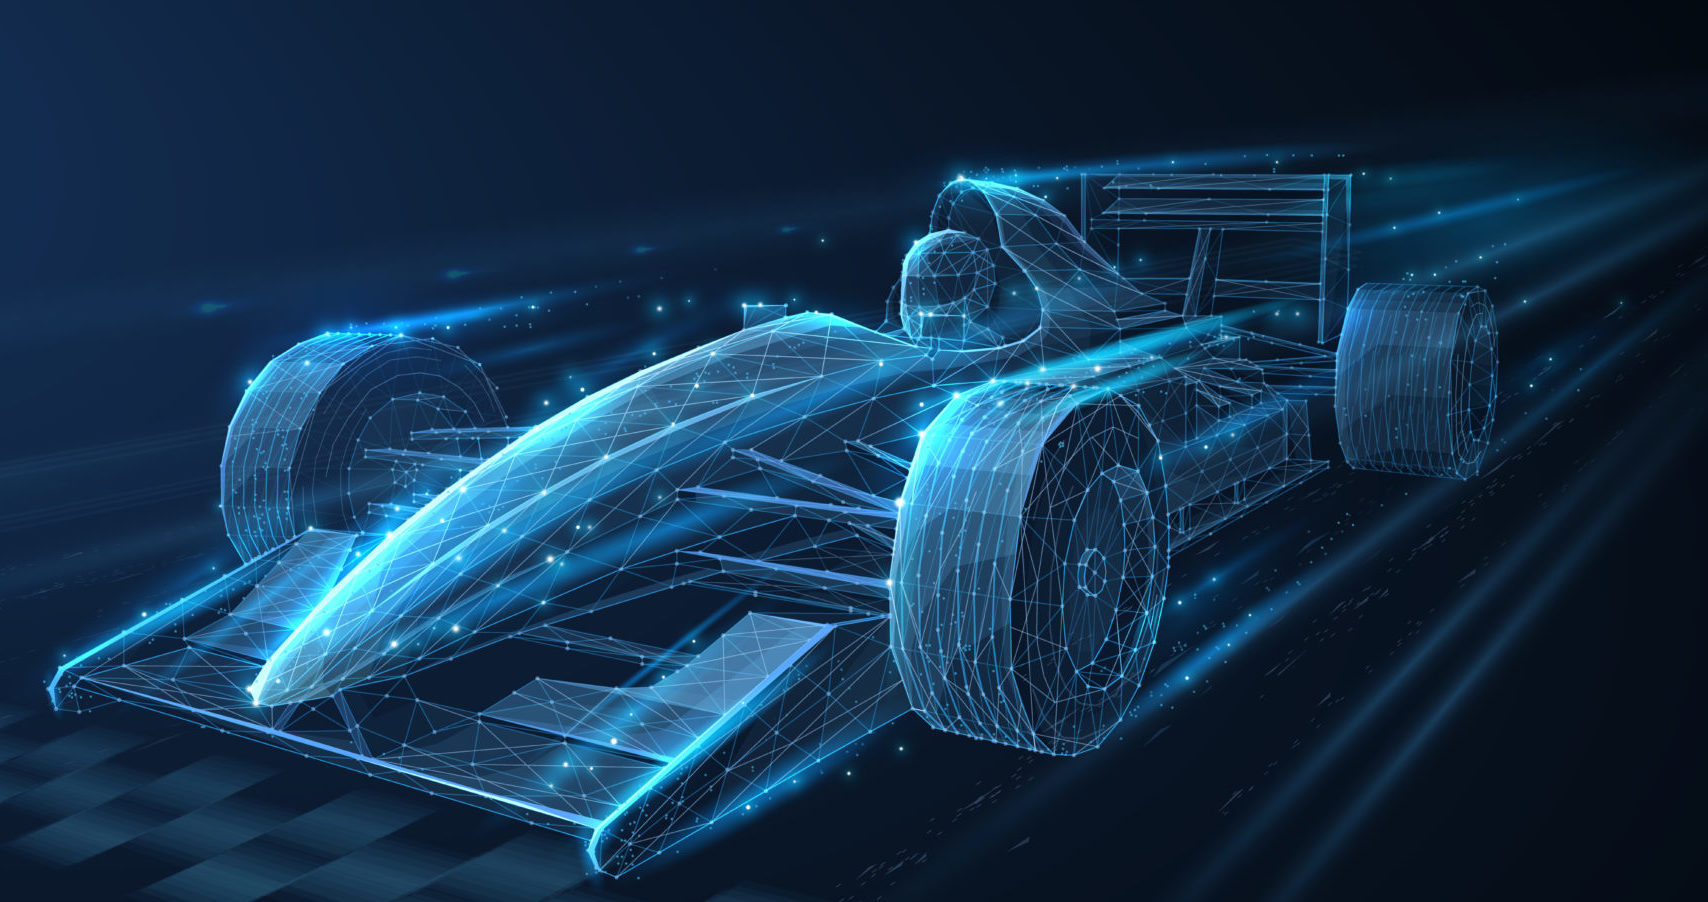 Digital Catapult and Formula 1® join forces to shape the events of the future